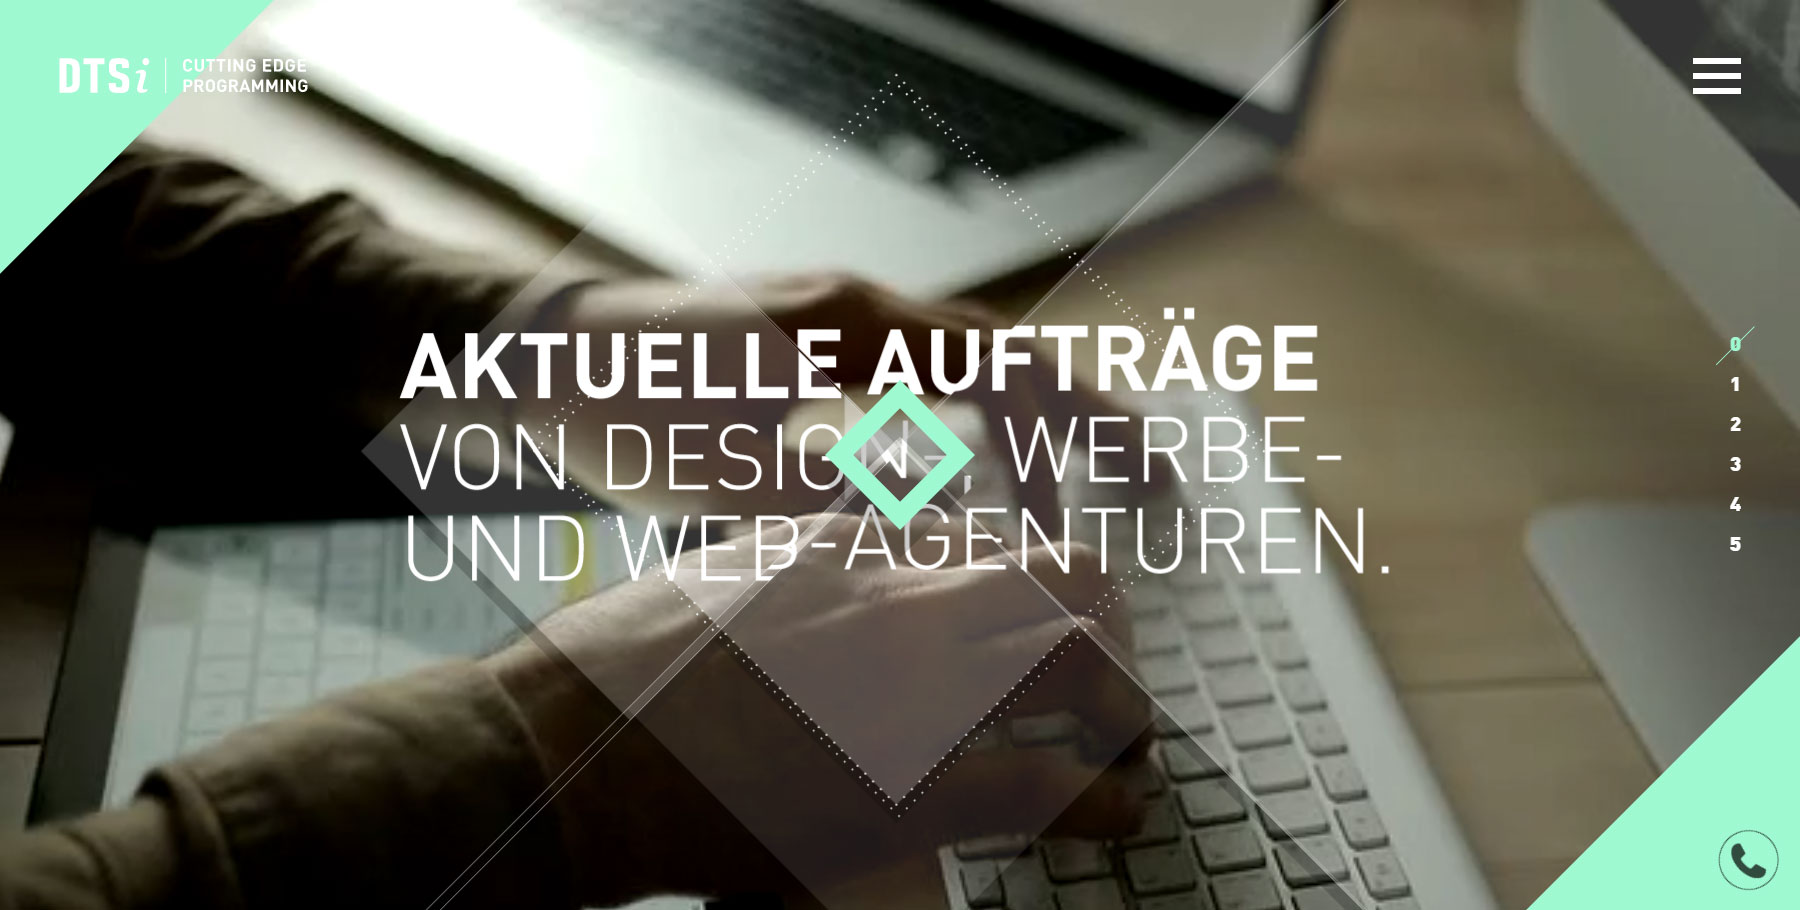 German Developers for Agencies - Website of the Day